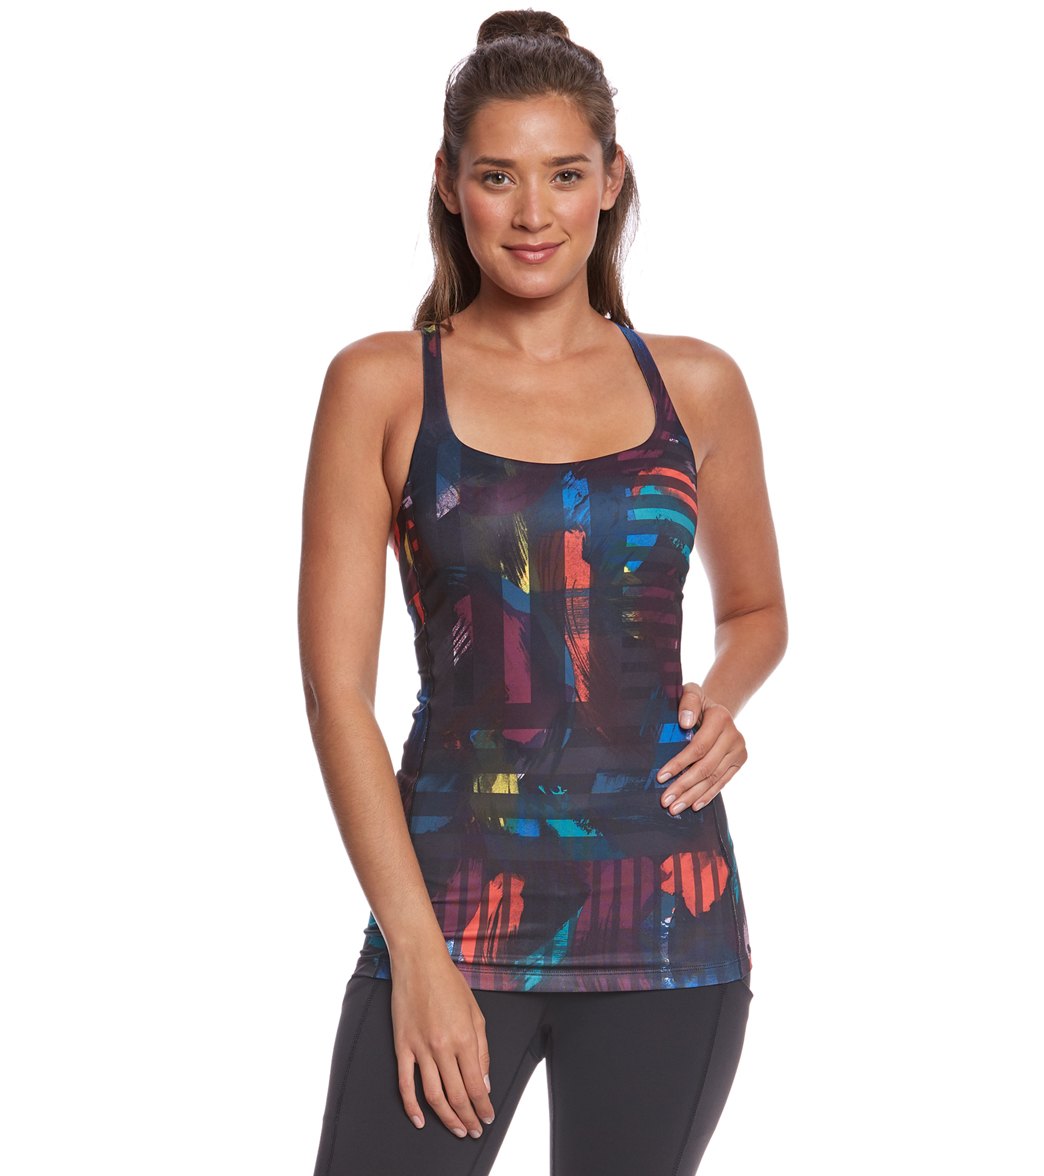 Lucy Women's Let It Be Bra Tank - Multi Brush Daubs Print X-Small Polyester/Spandex - Swimoutlet.com